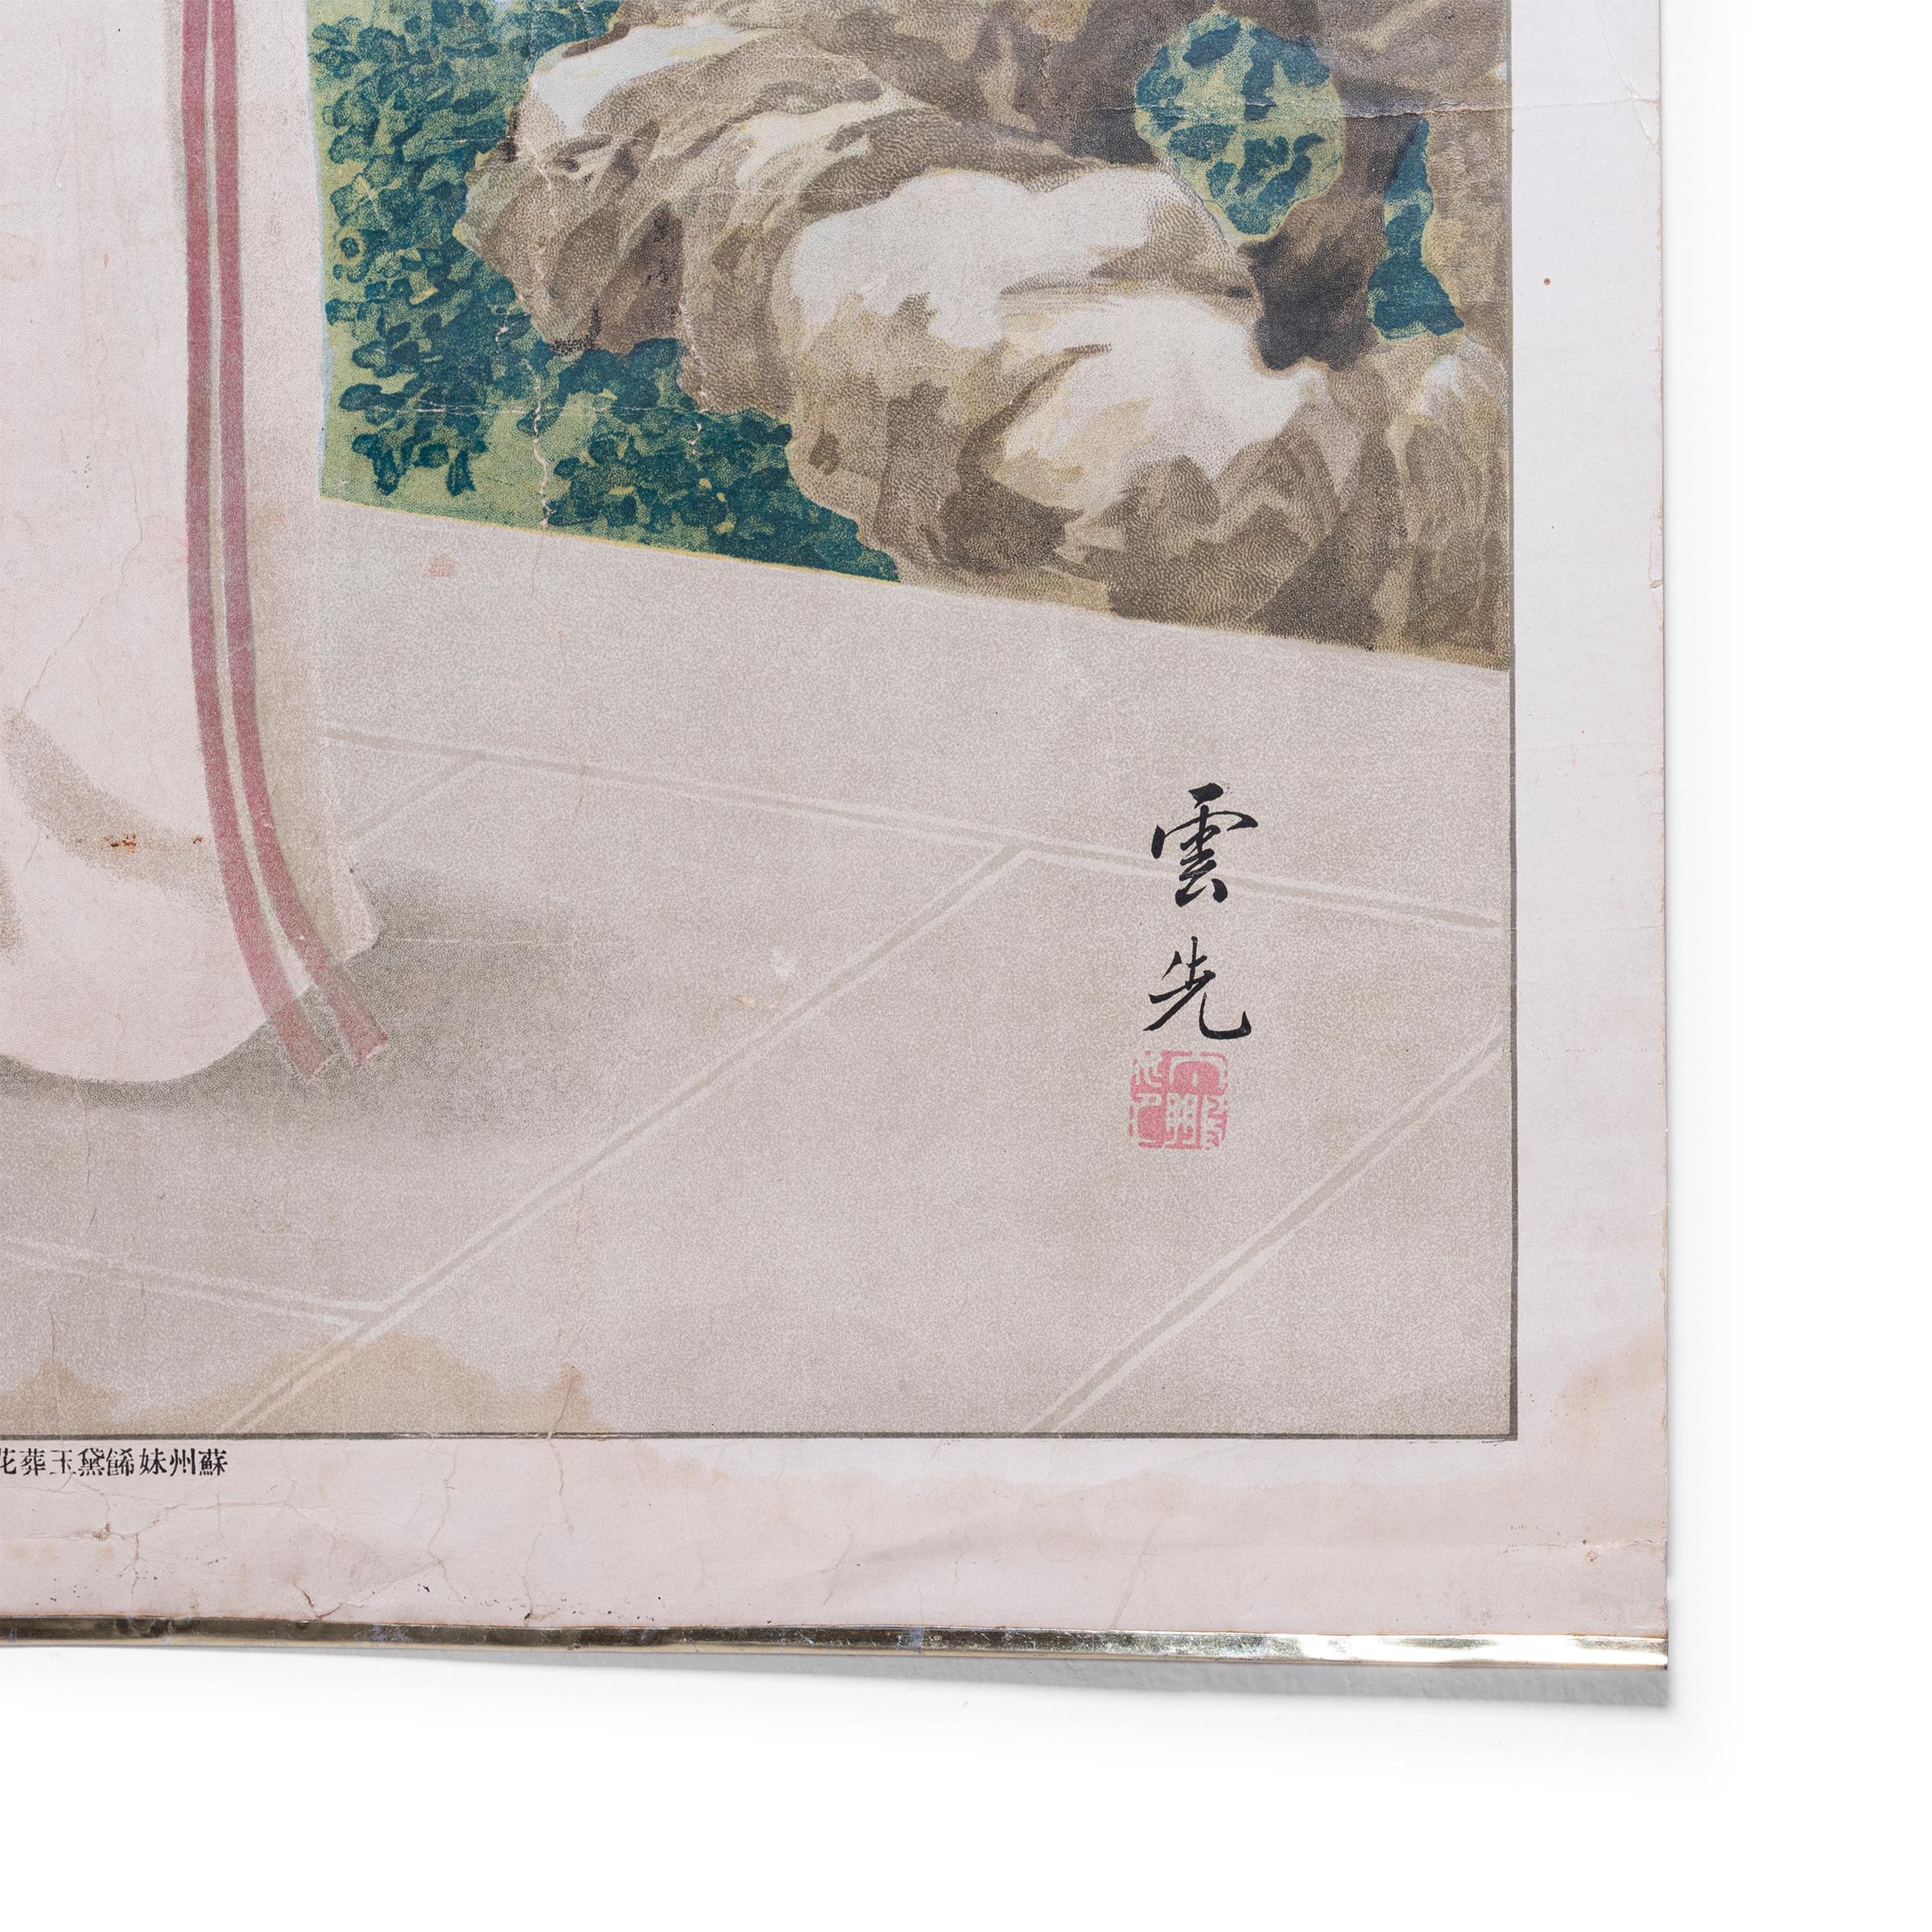 This advertising poster from the 1930s melds the meticulous detail of traditional Chinese painting with the craft of color lithography that was popularized in China during the economic Boom of early 20th century Shanghai. It depicts a fashionable